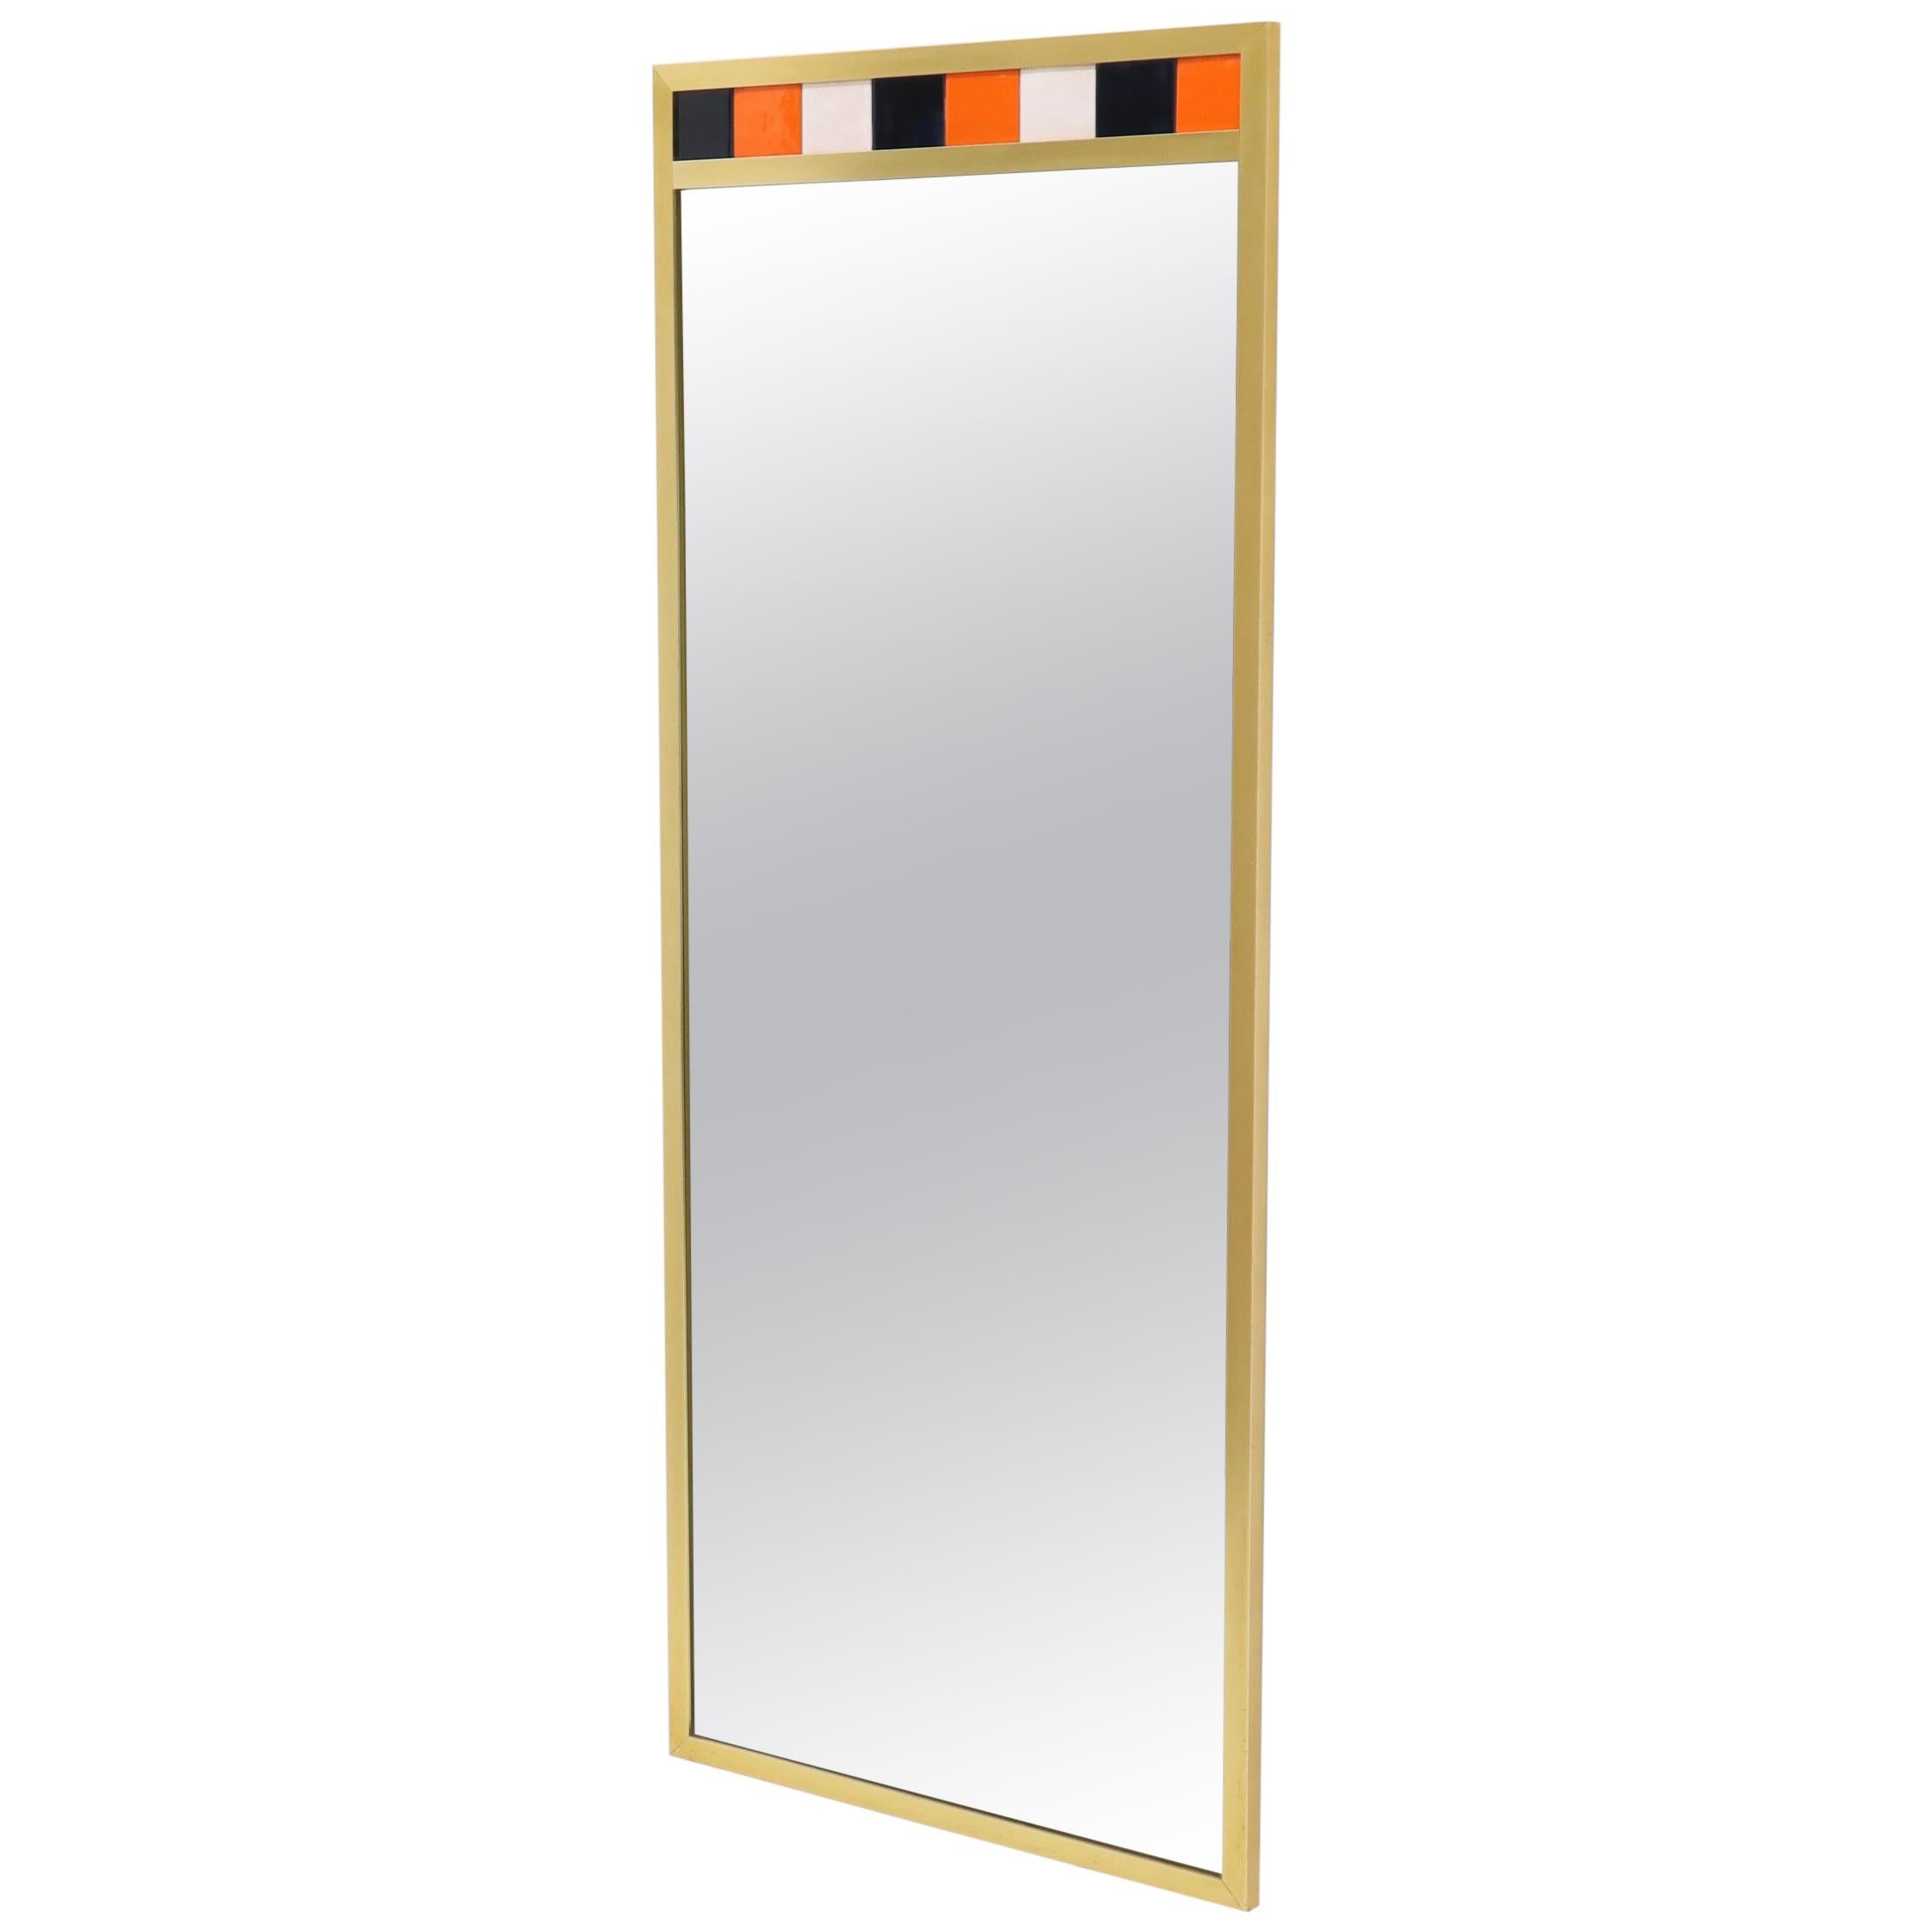 Tall Rectangular Brass and Colored Tiles Frame Wall Hanging Mirror For Sale